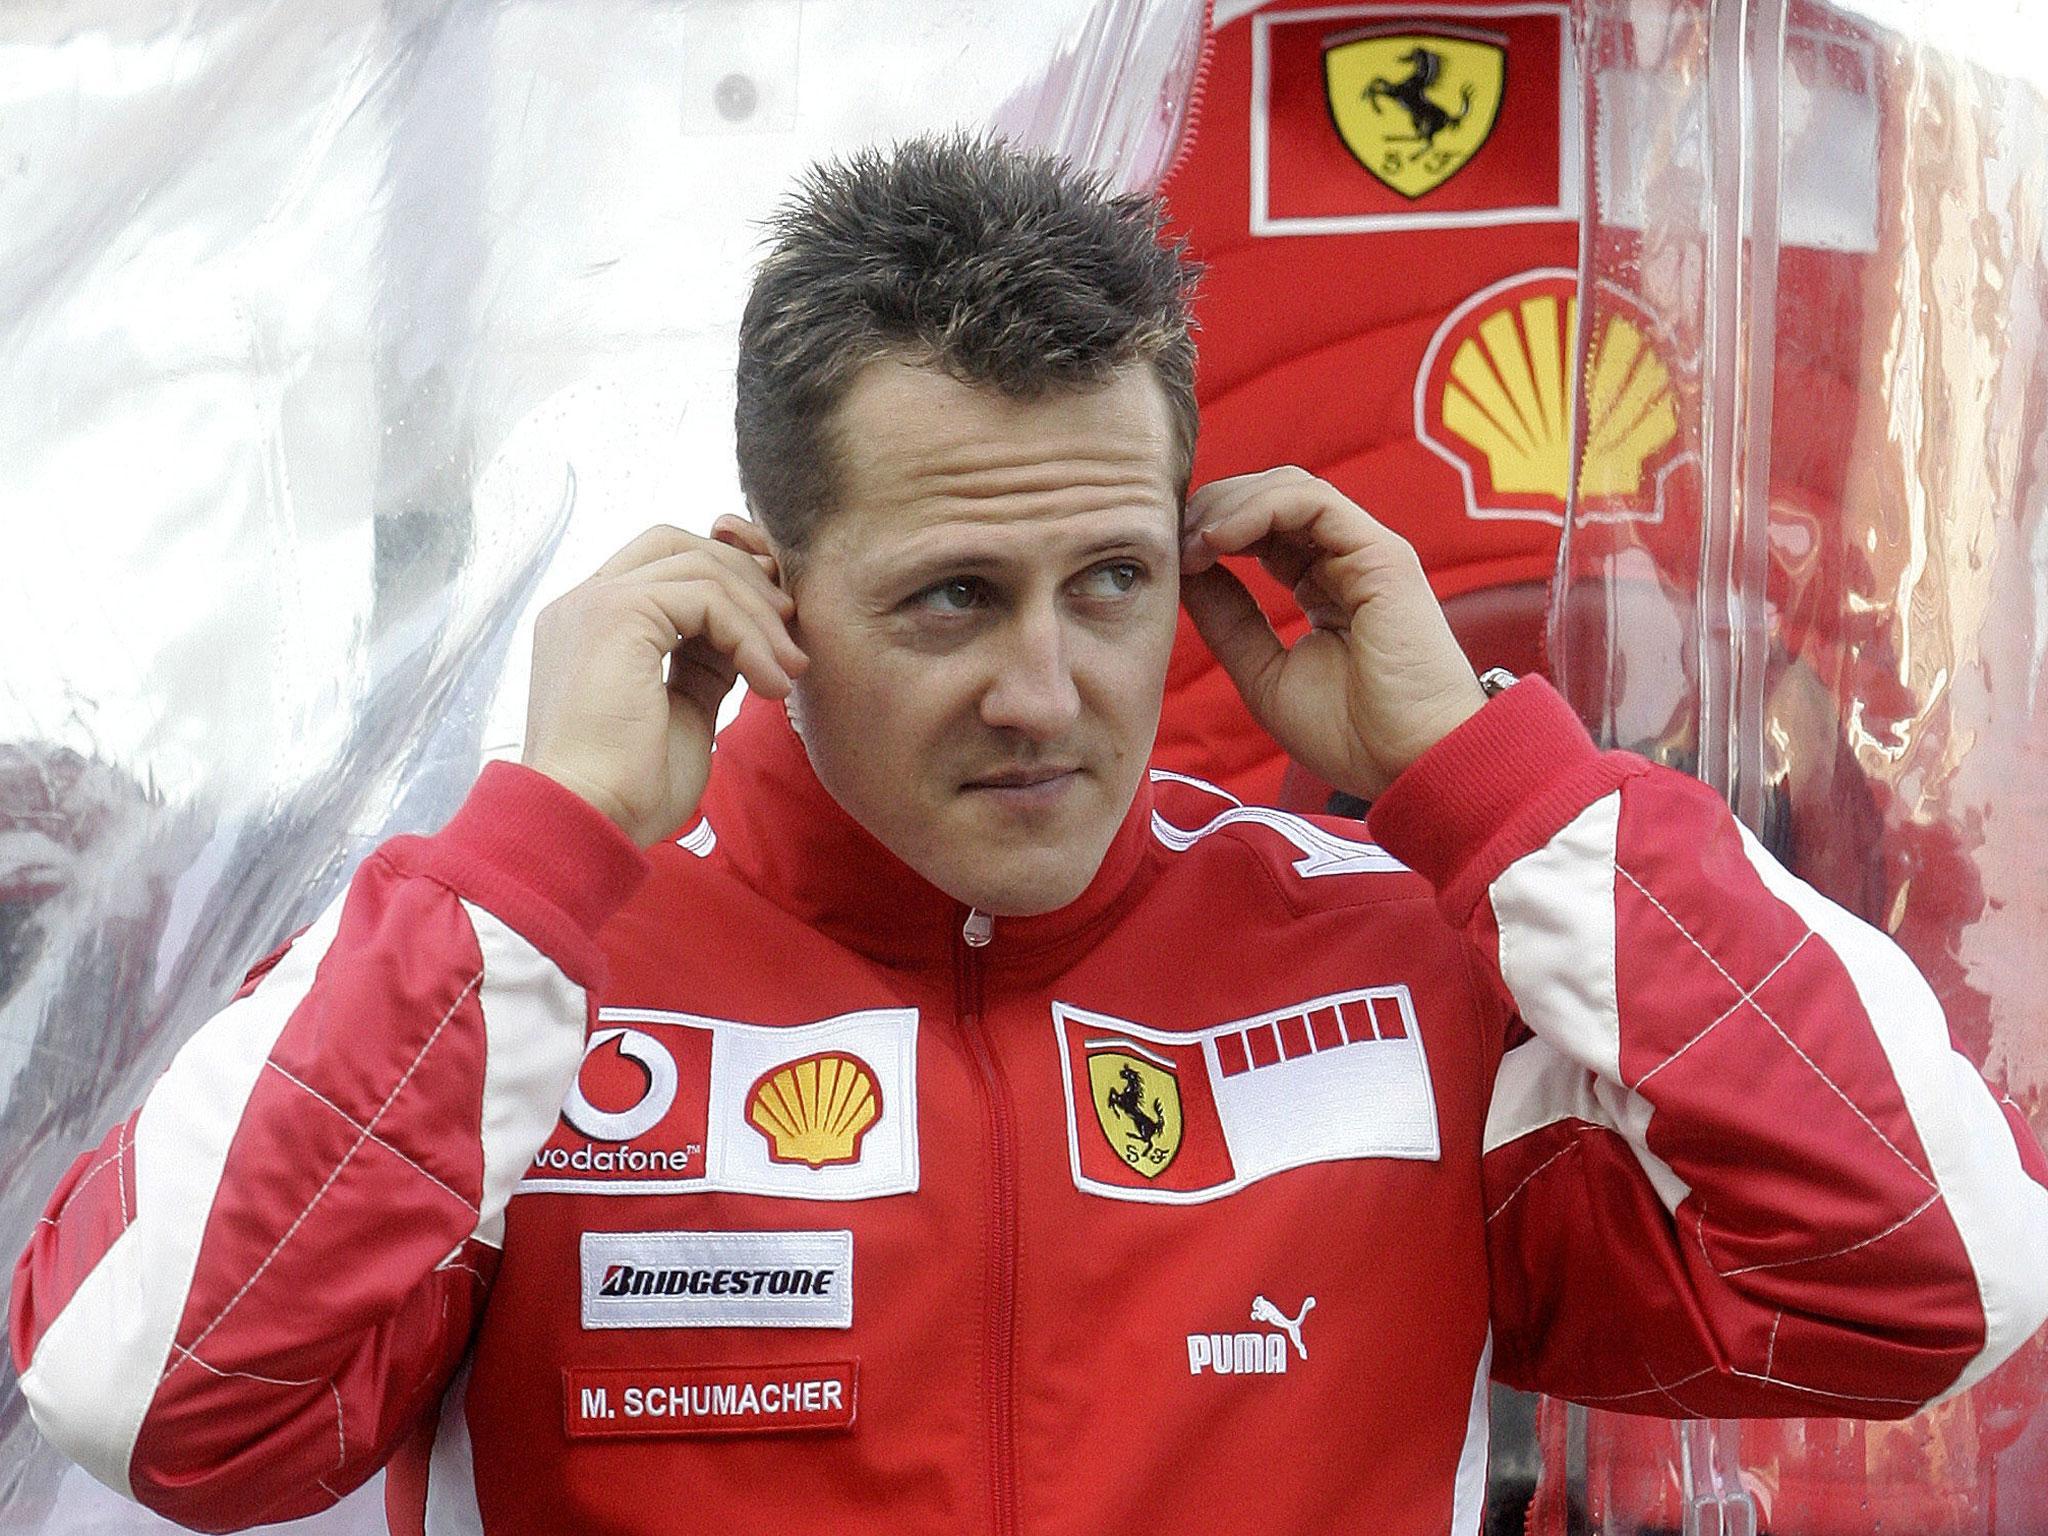 Michael Schumacher is seen in the pits during a training session at the Ricardo Tormo racetrack in Cheste near Valencia in 2006